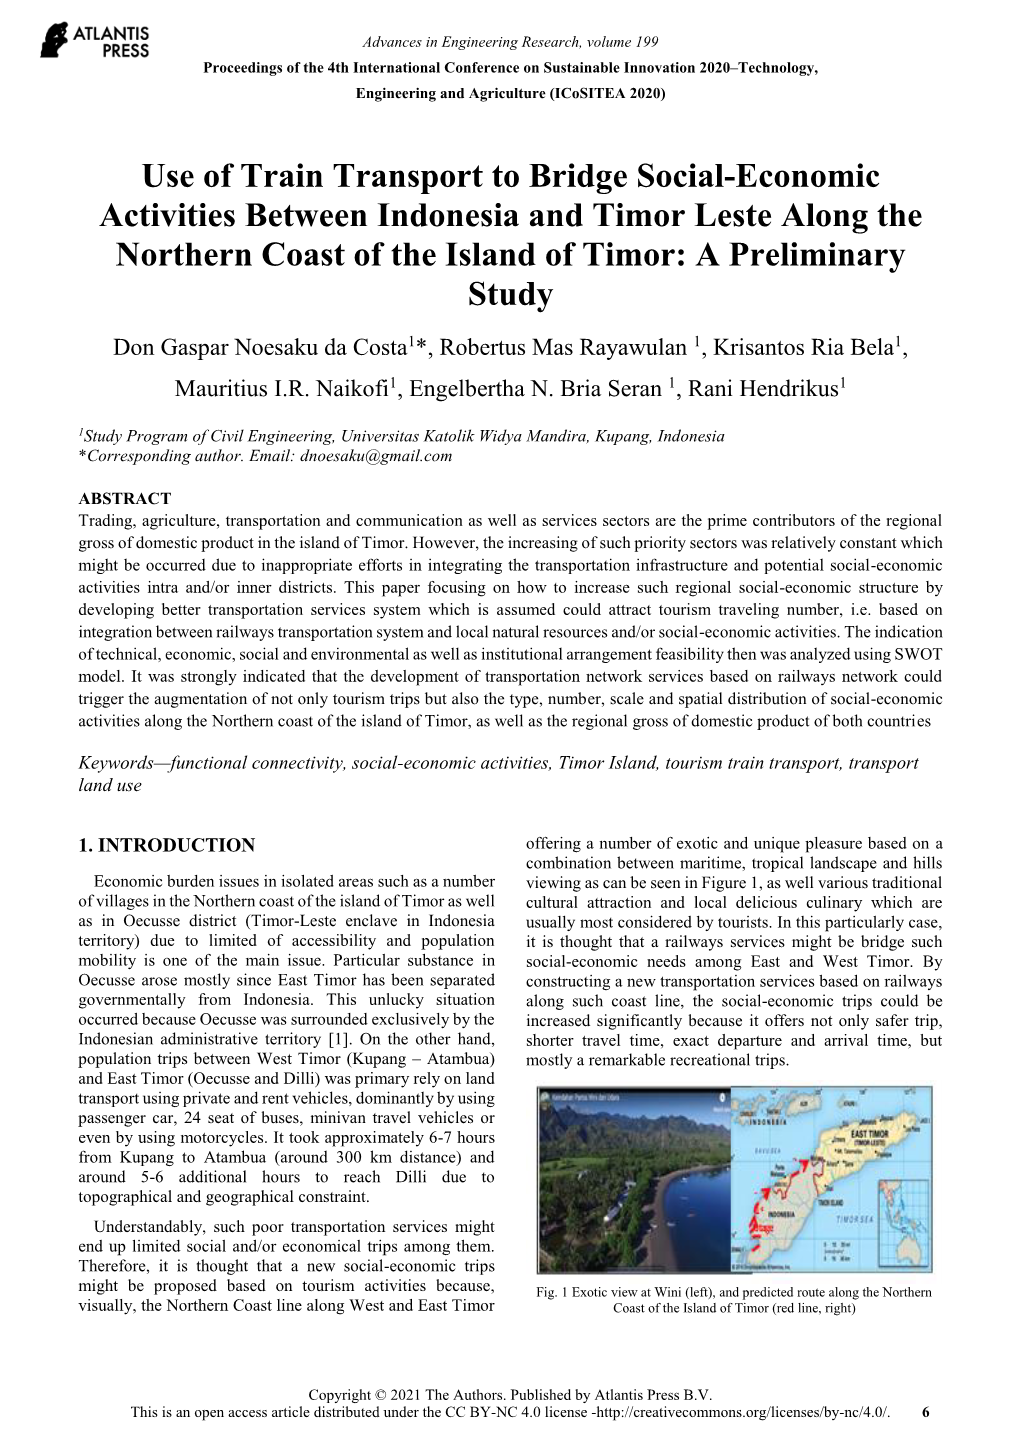 Use of Train Transport to Bridge Social-Economic Activities Between Indonesia and Timor Leste Along the Northern Coast of the Is